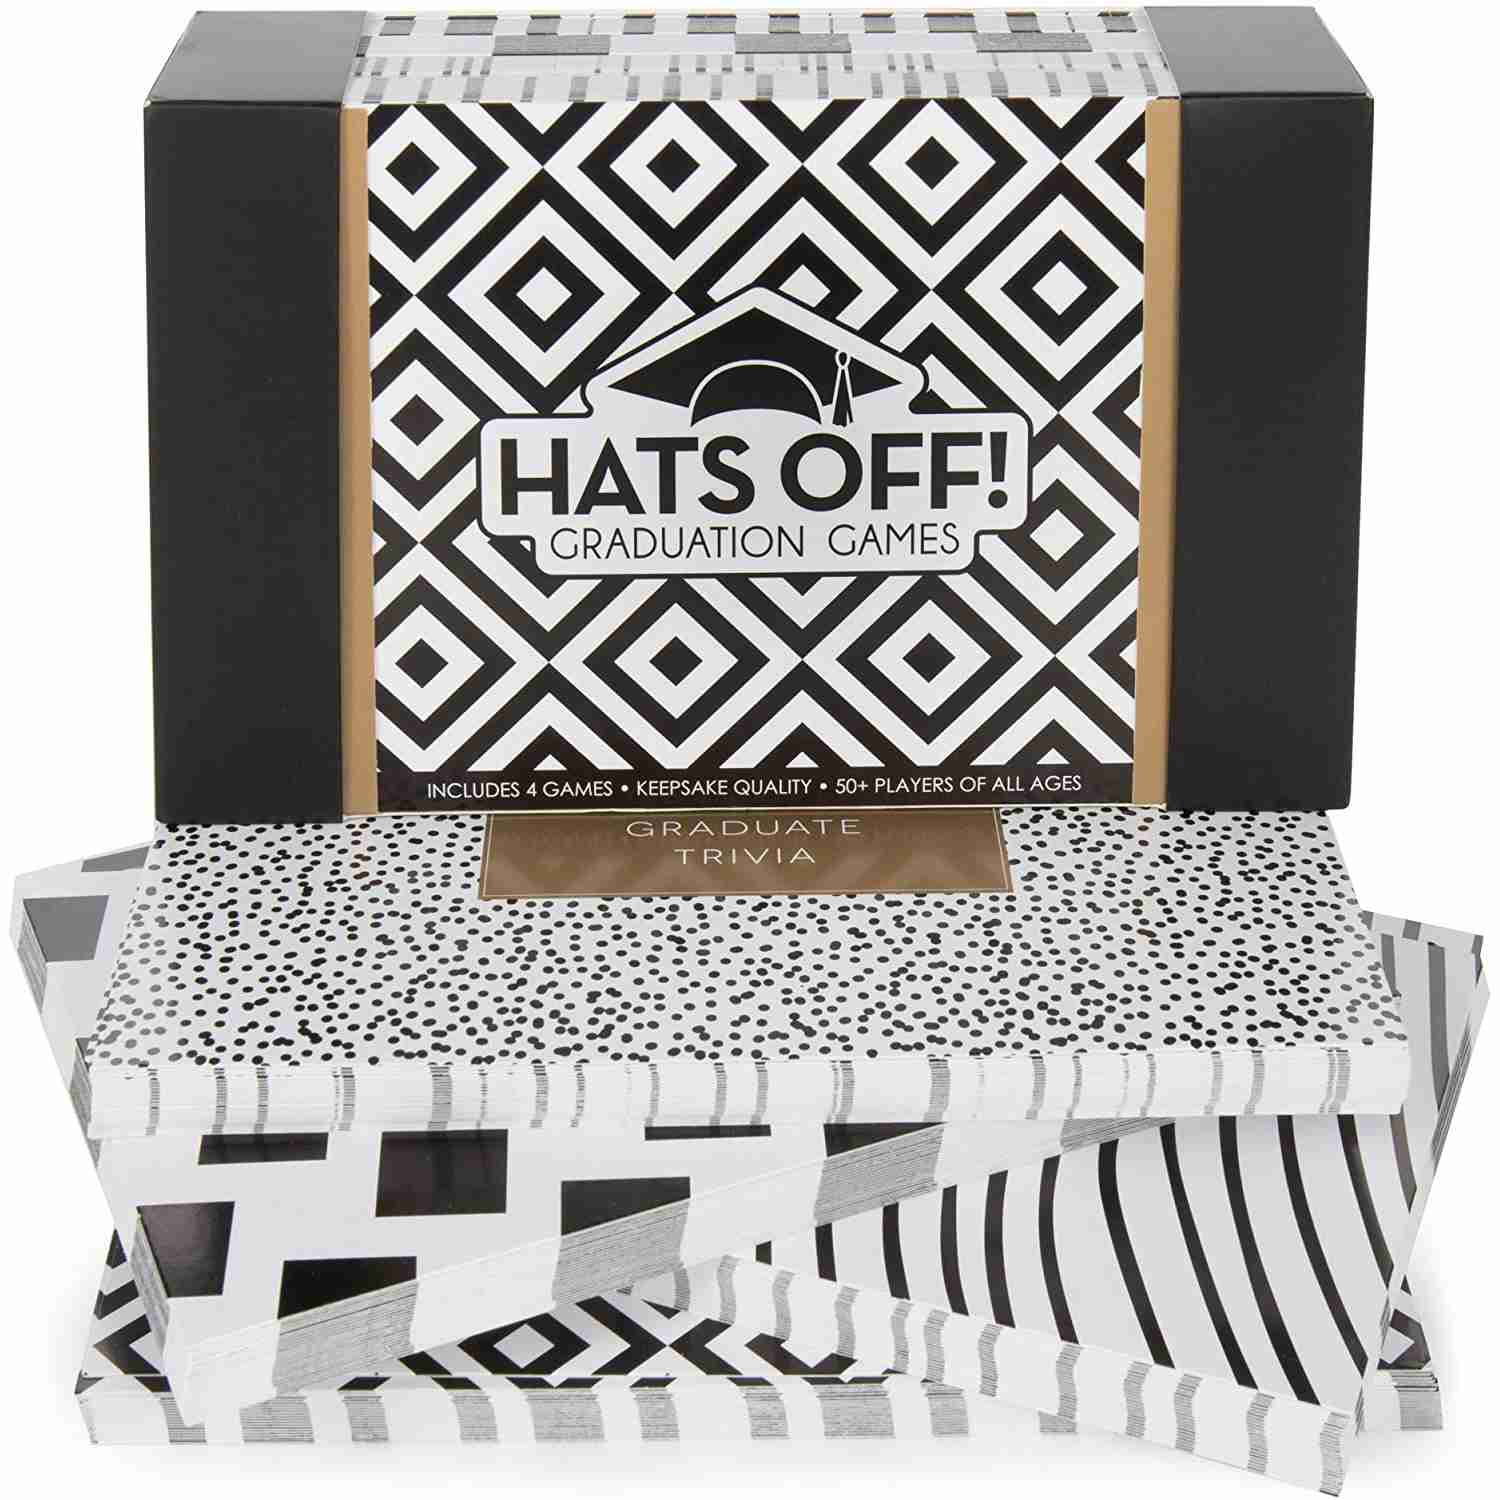 Hats-Off with discount code